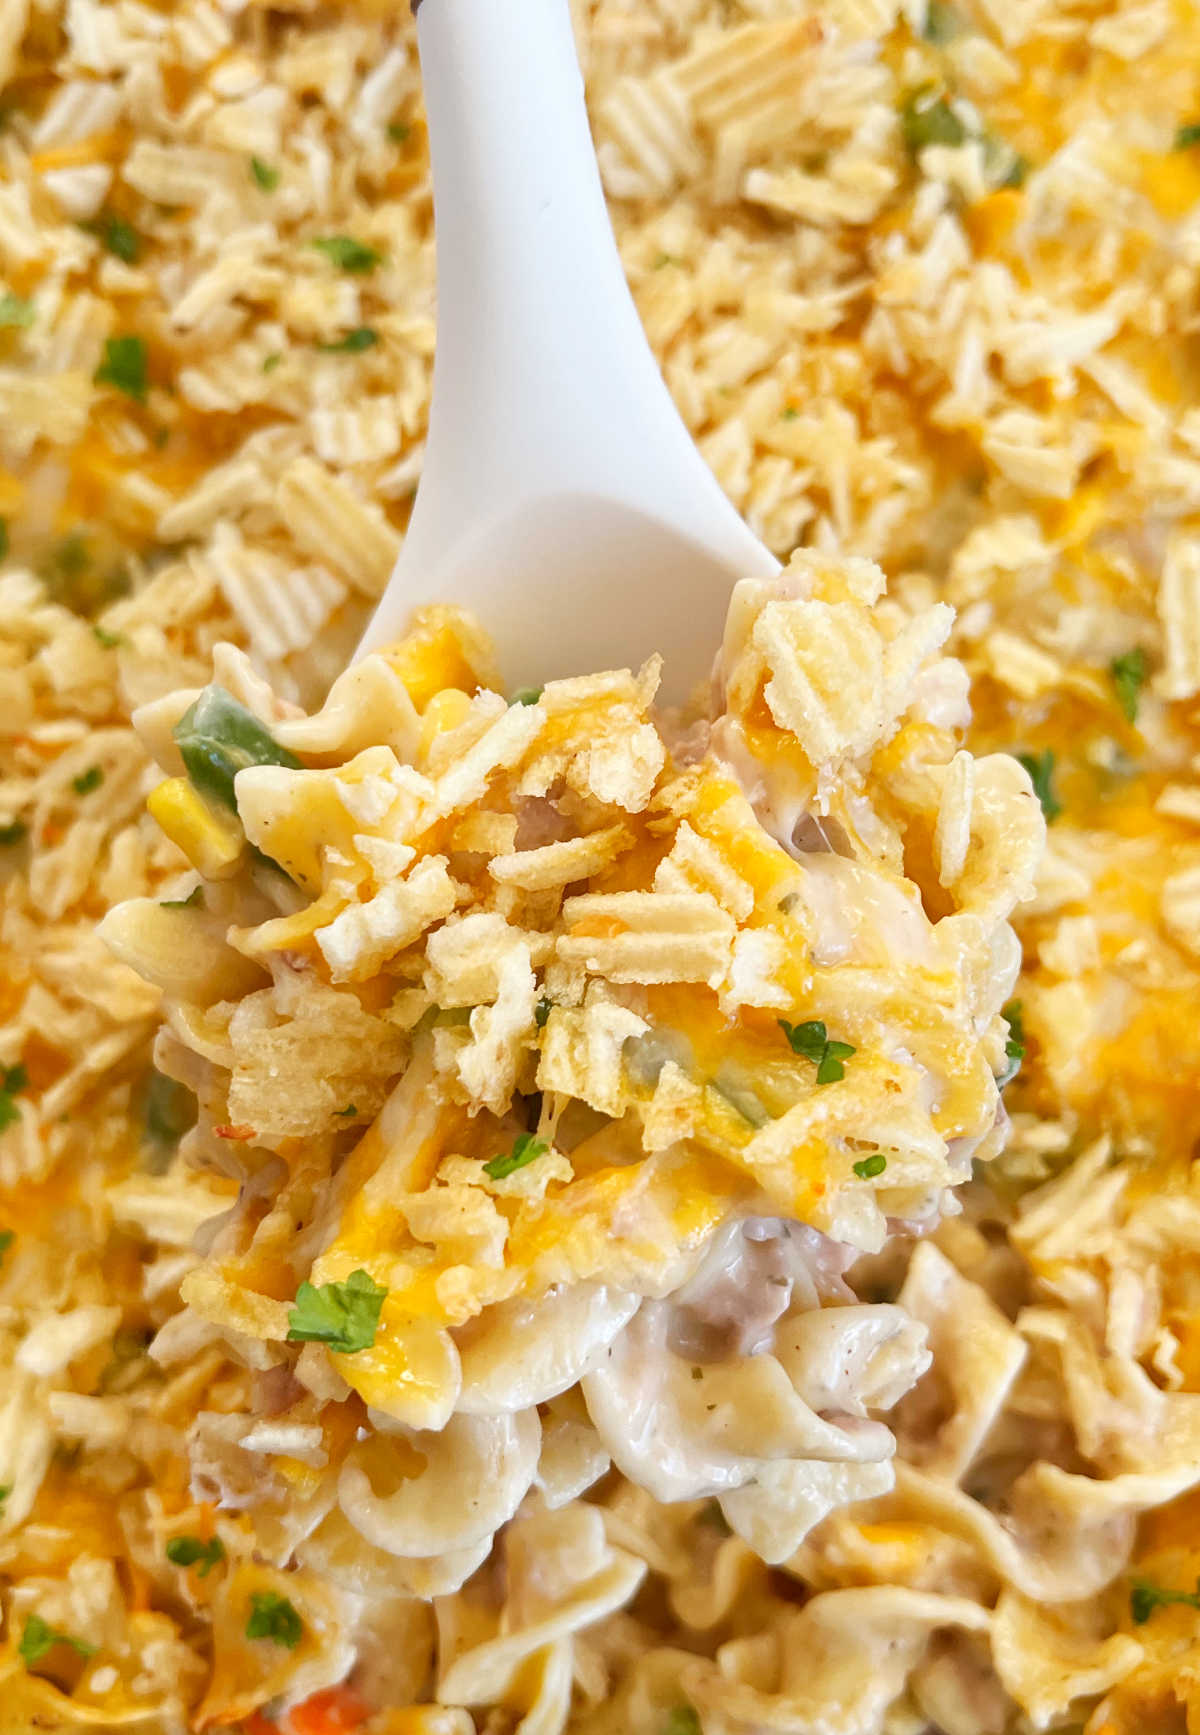 old fashioned tuna casserole with potato chips and cheese on serving spoon.